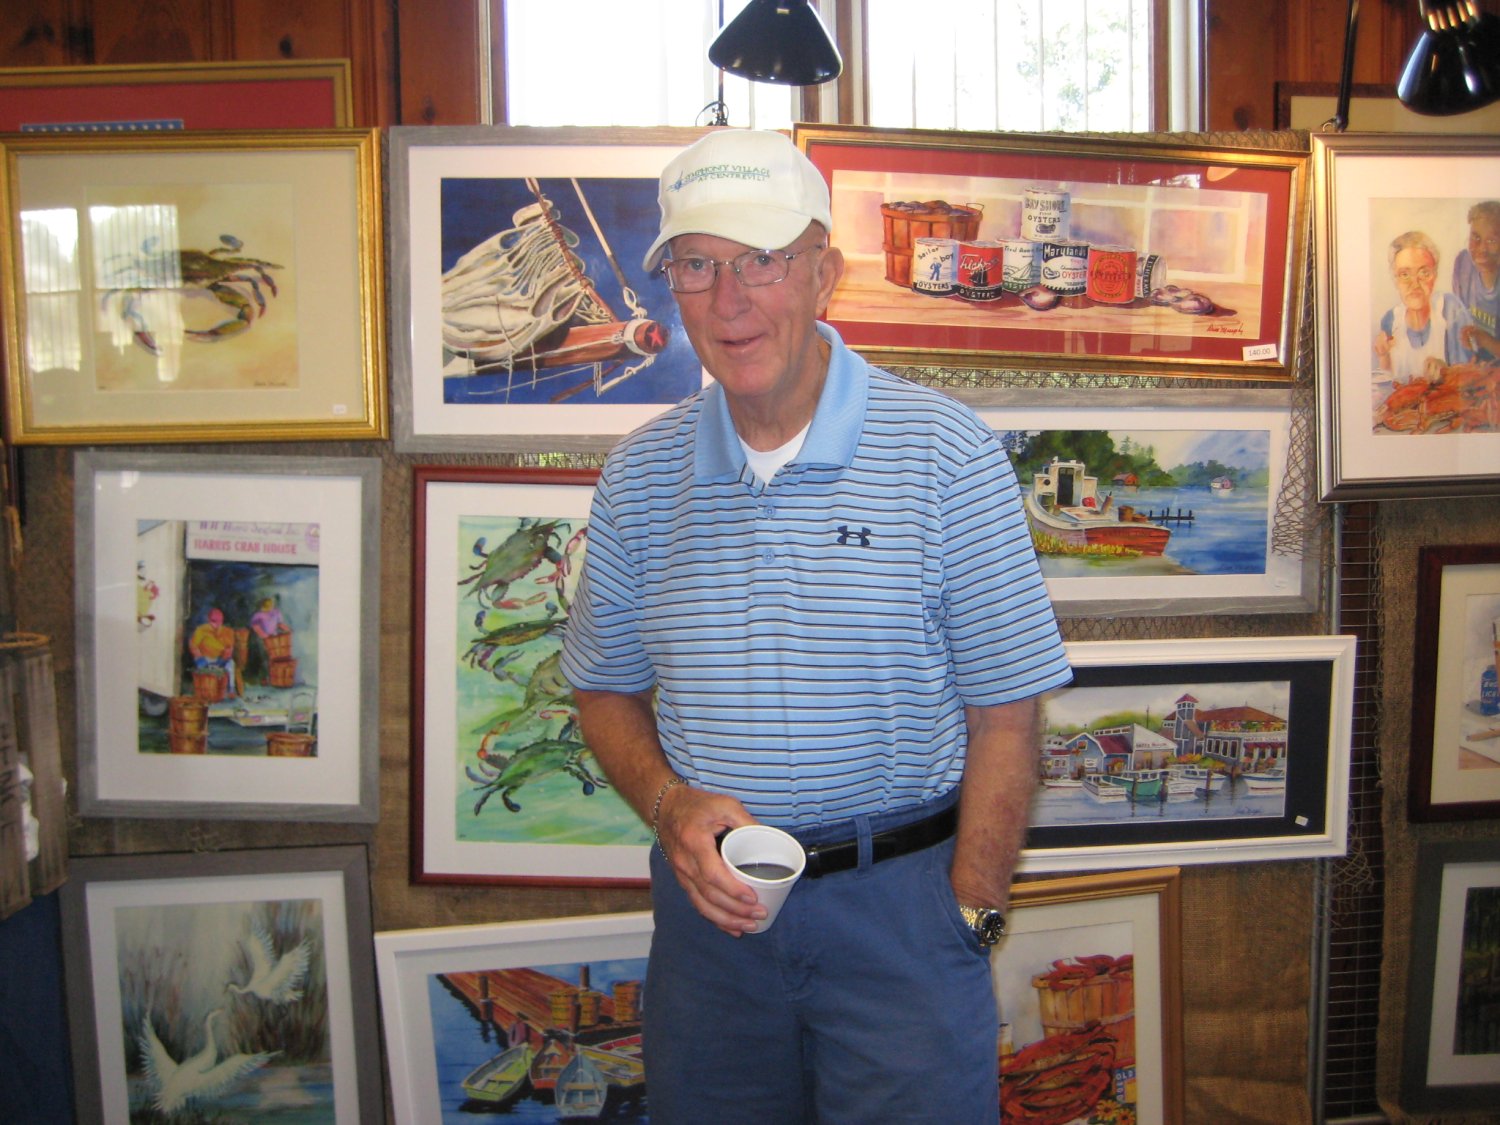  Photographer's Error - I got the wrong guy!&nbsp; This is Bob Backer standing in front of Dave Murphy's watercolors.   